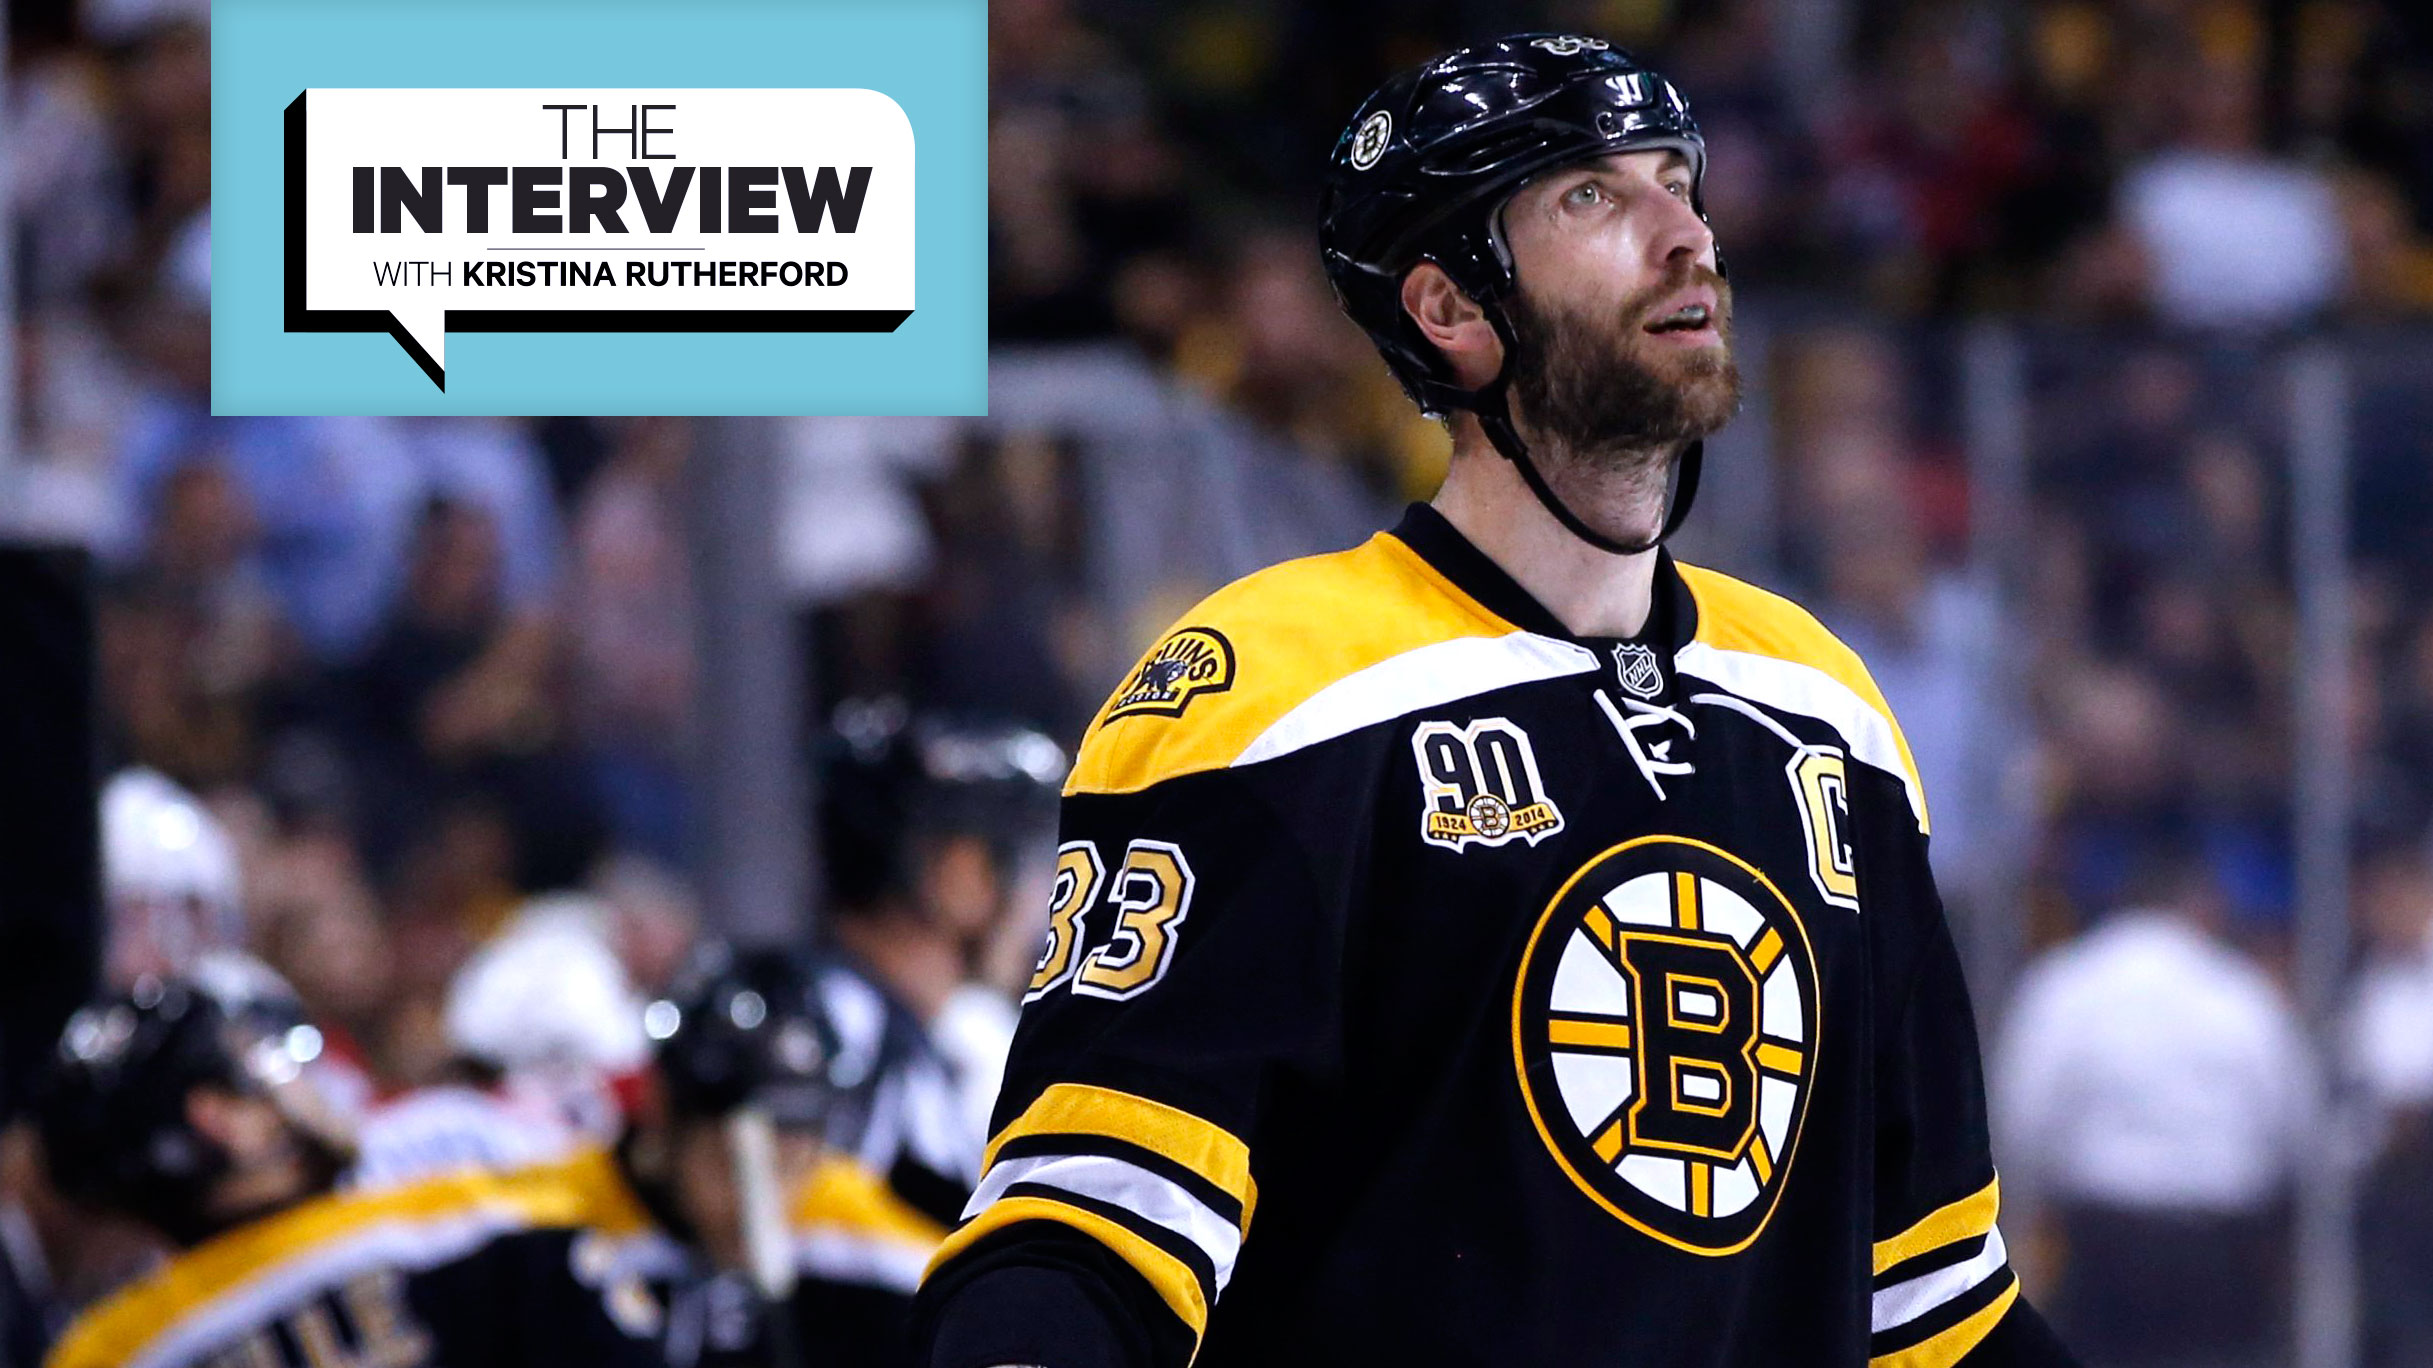 He can't talk, but he'll play: Bruins' Zdeno Chara starts in Game